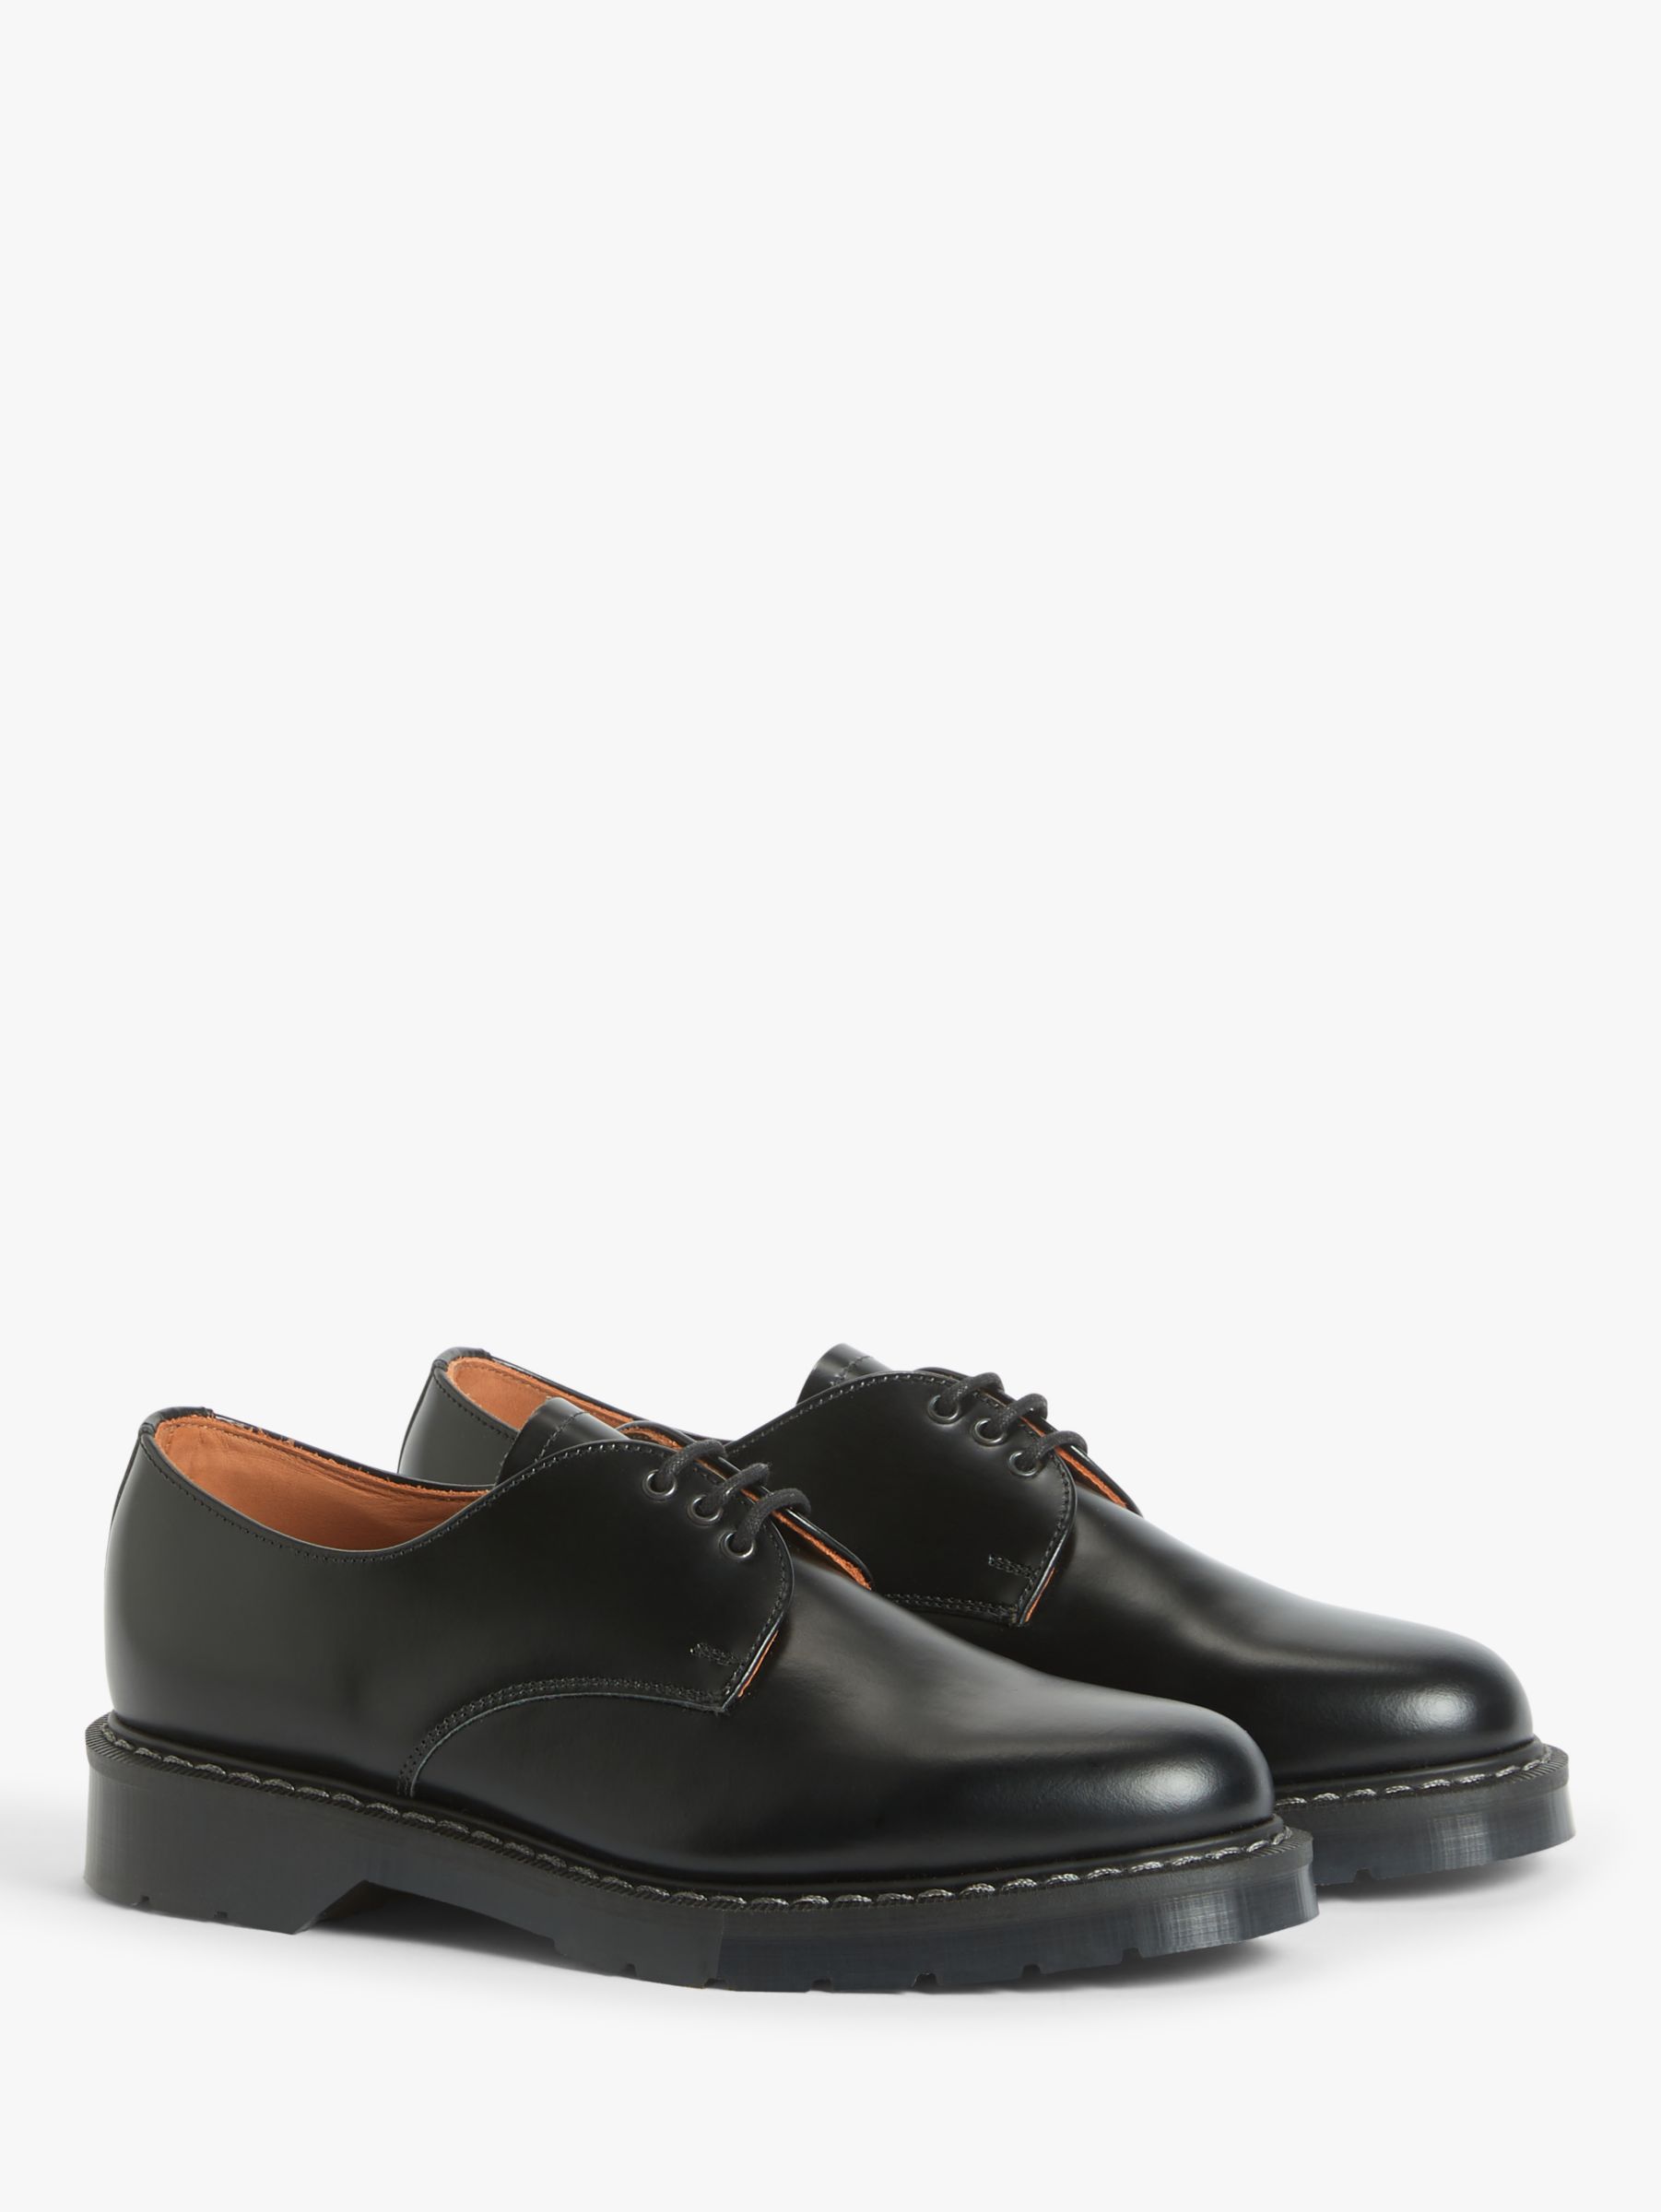 Solovair Made in England 3 Eyelet Hi Shine Leather Gibson Shoes, Black ...